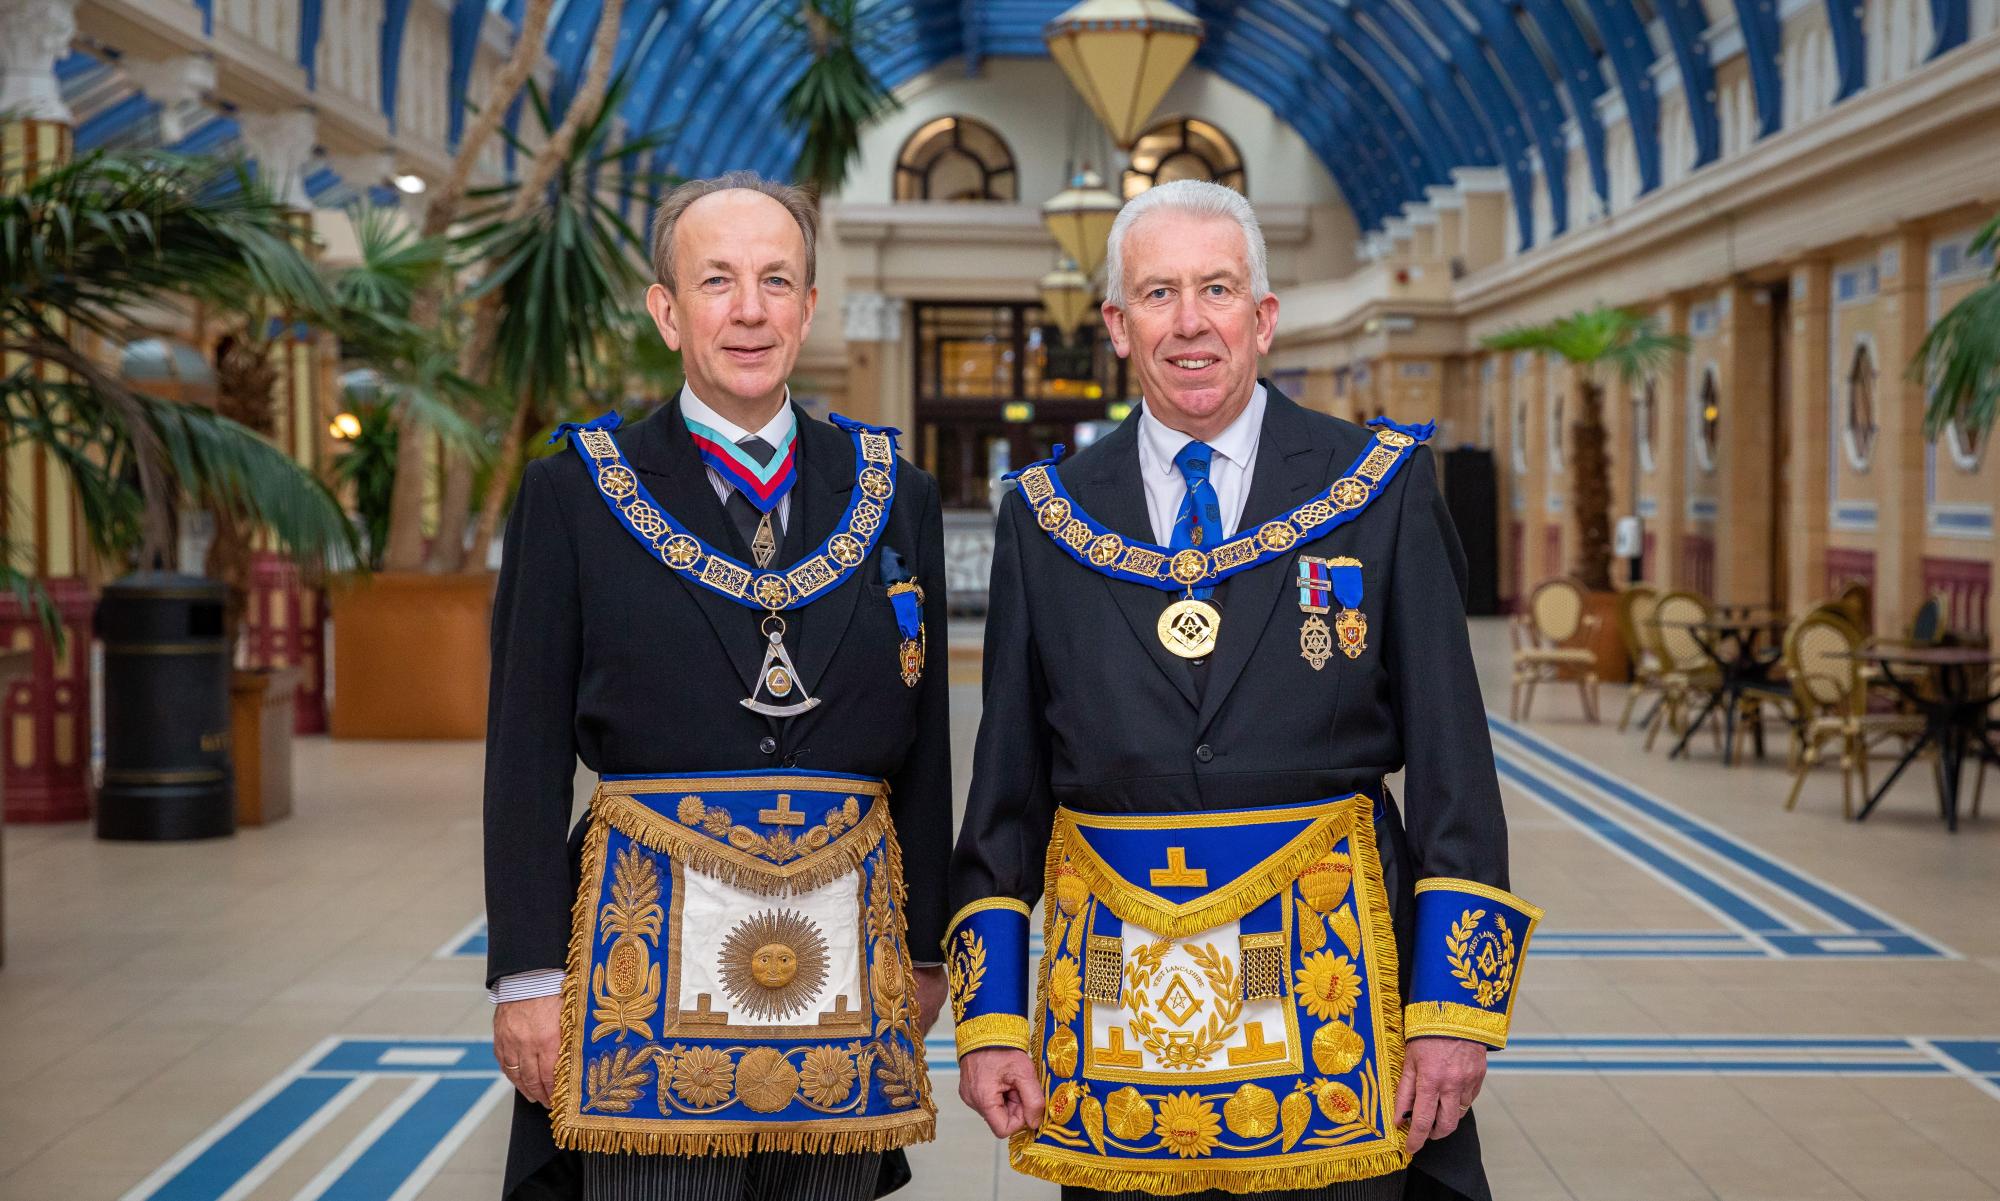 Provincial Grand Master Mark Matthews (right) pictured with Pro Grand Master Jonathan Spence at the Winter Gardens in Blackpool.